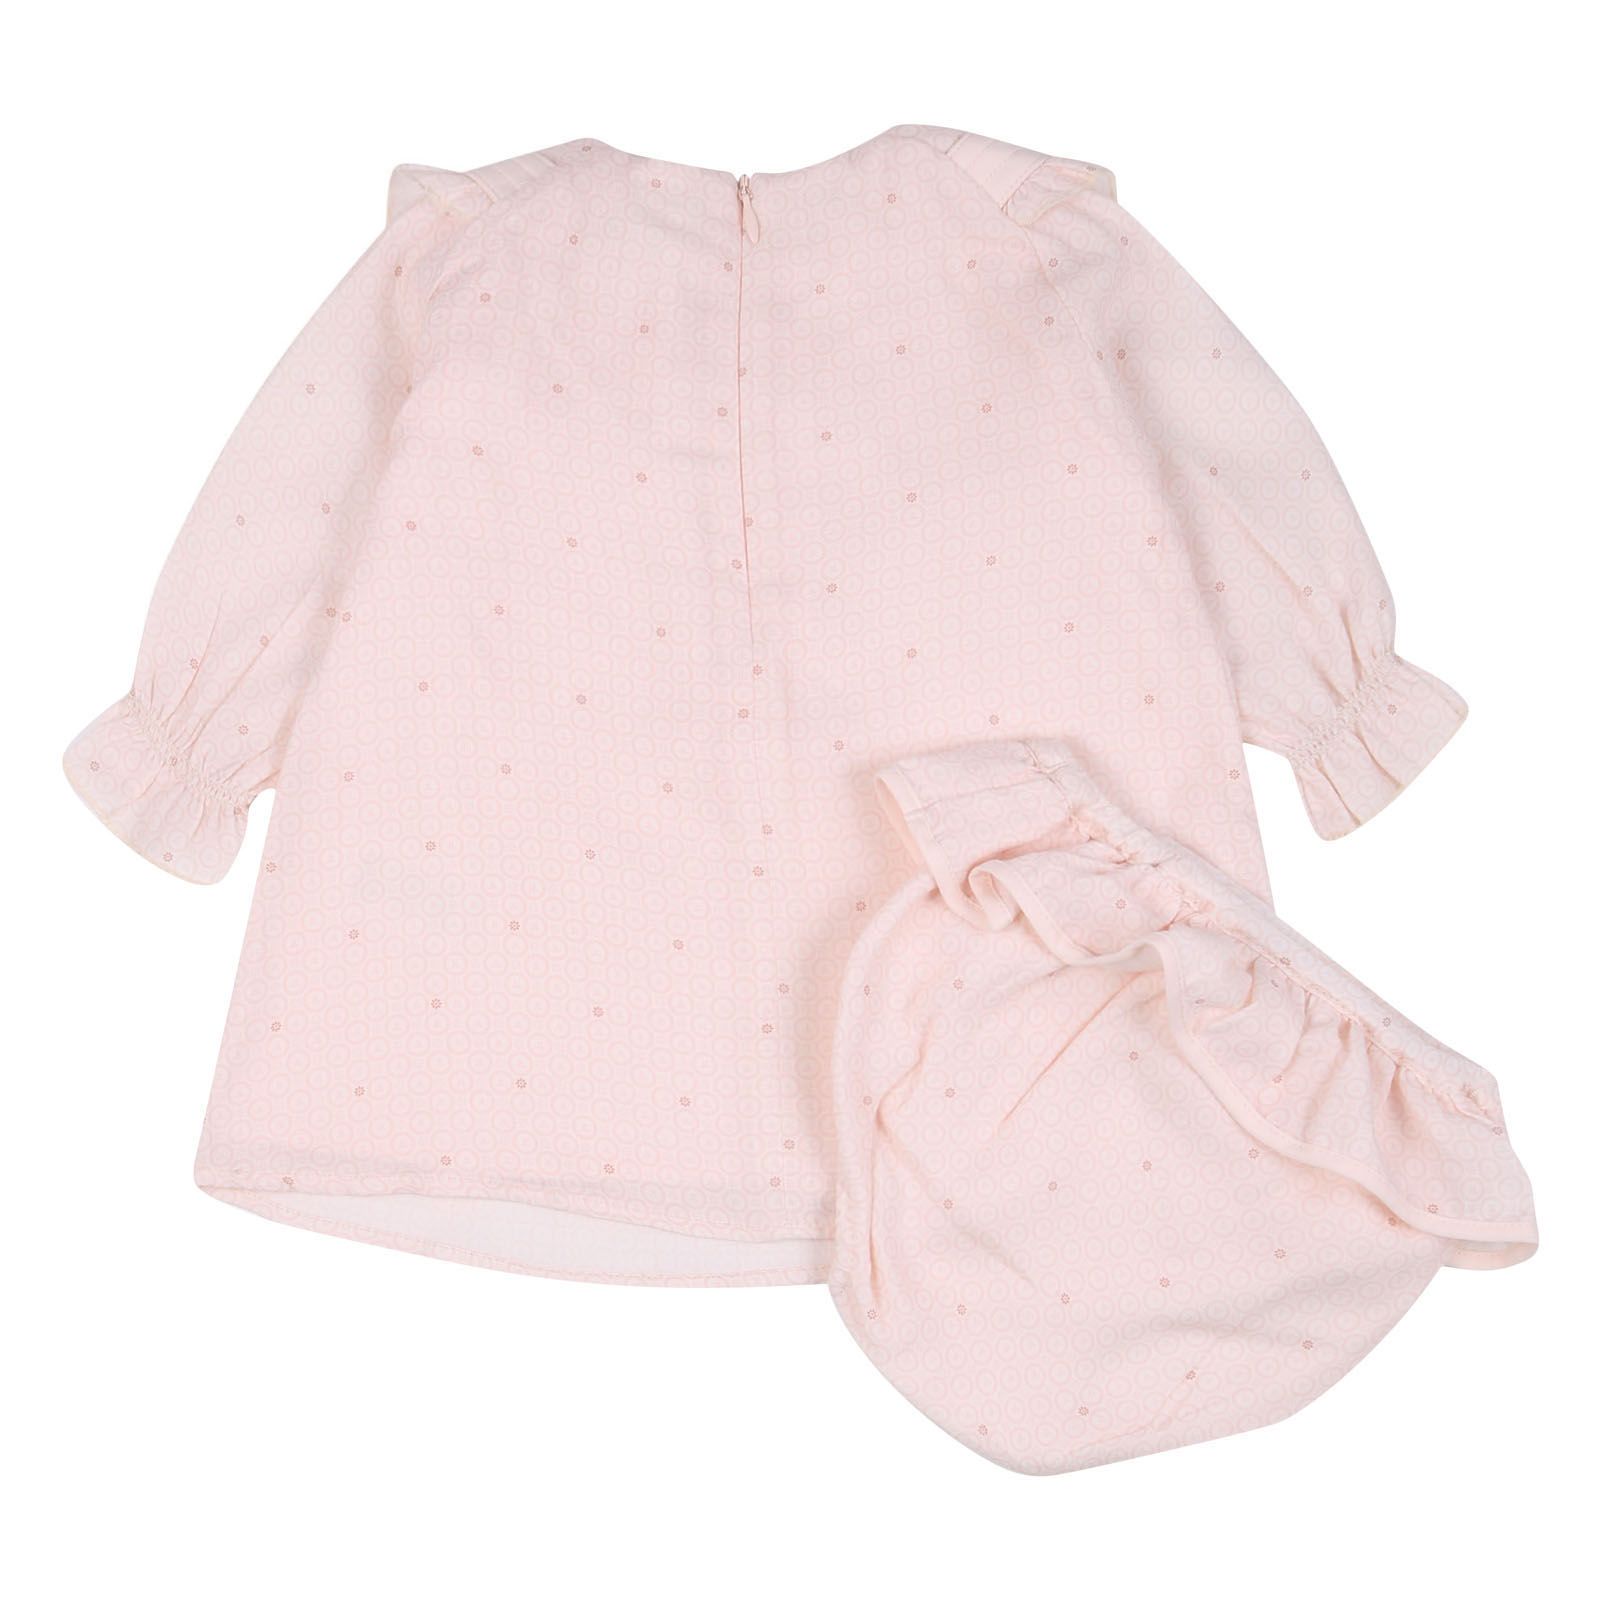 Lanvin ice pink suit - 2 piece suit details. Long-sleeved dress with elastic cuffs, U-neck, pink bottom, completely patterned, logoed plate applied to the hem, back zip closure, coordinated culotte -Washing max 30 °